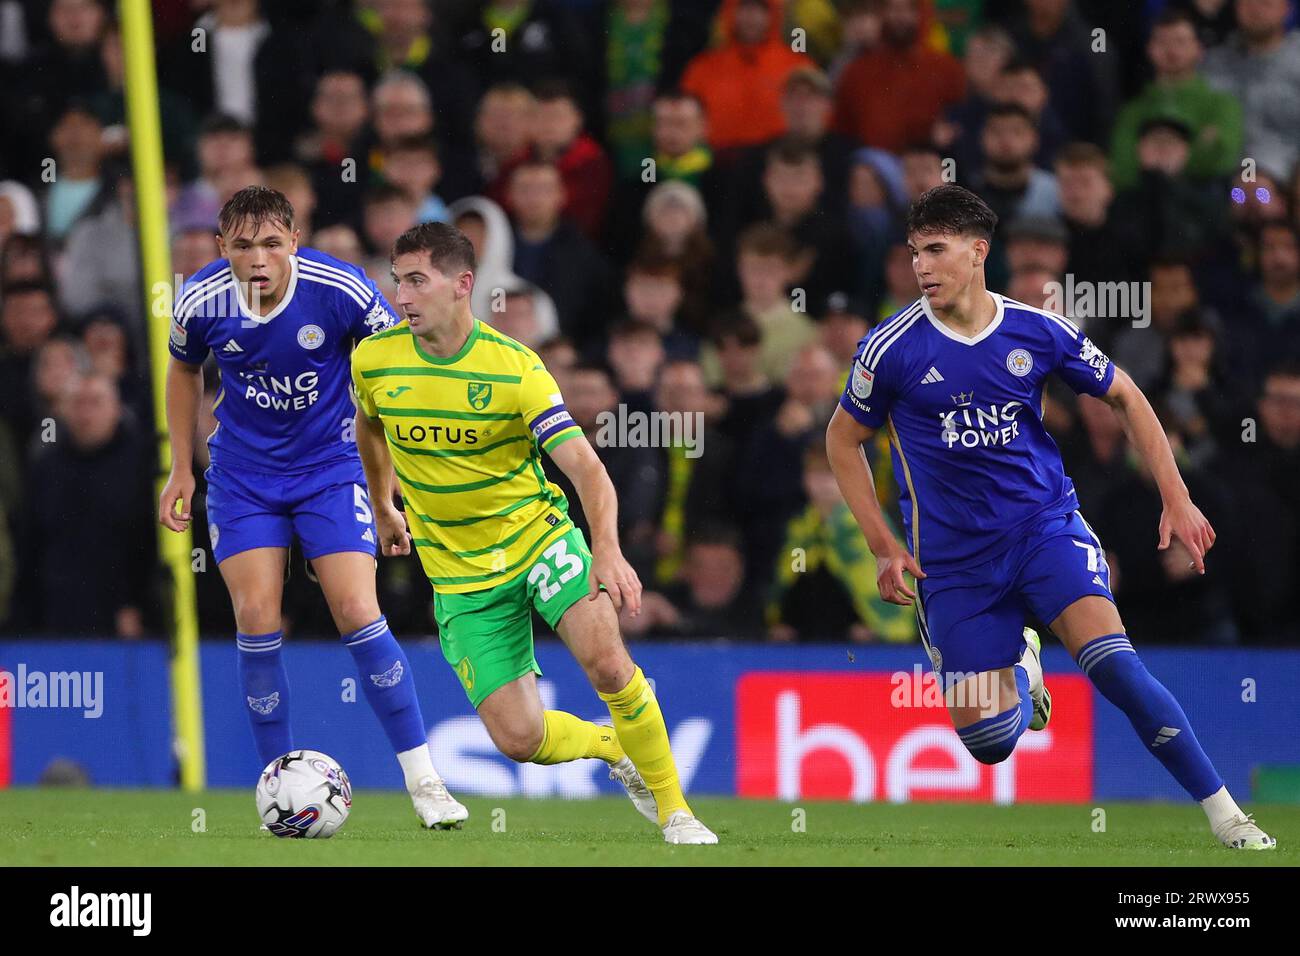 Kenny McLean of Norwich City in action with Cesare Casadei (R) and Callum Doyle (L) of Leicester City- Norwich City v Leicester City, Sky Bet Championship, Carrow Road, Norwich, UK - 20th September 2023  Editorial Use Only - DataCo restrictions apply Stock Photo